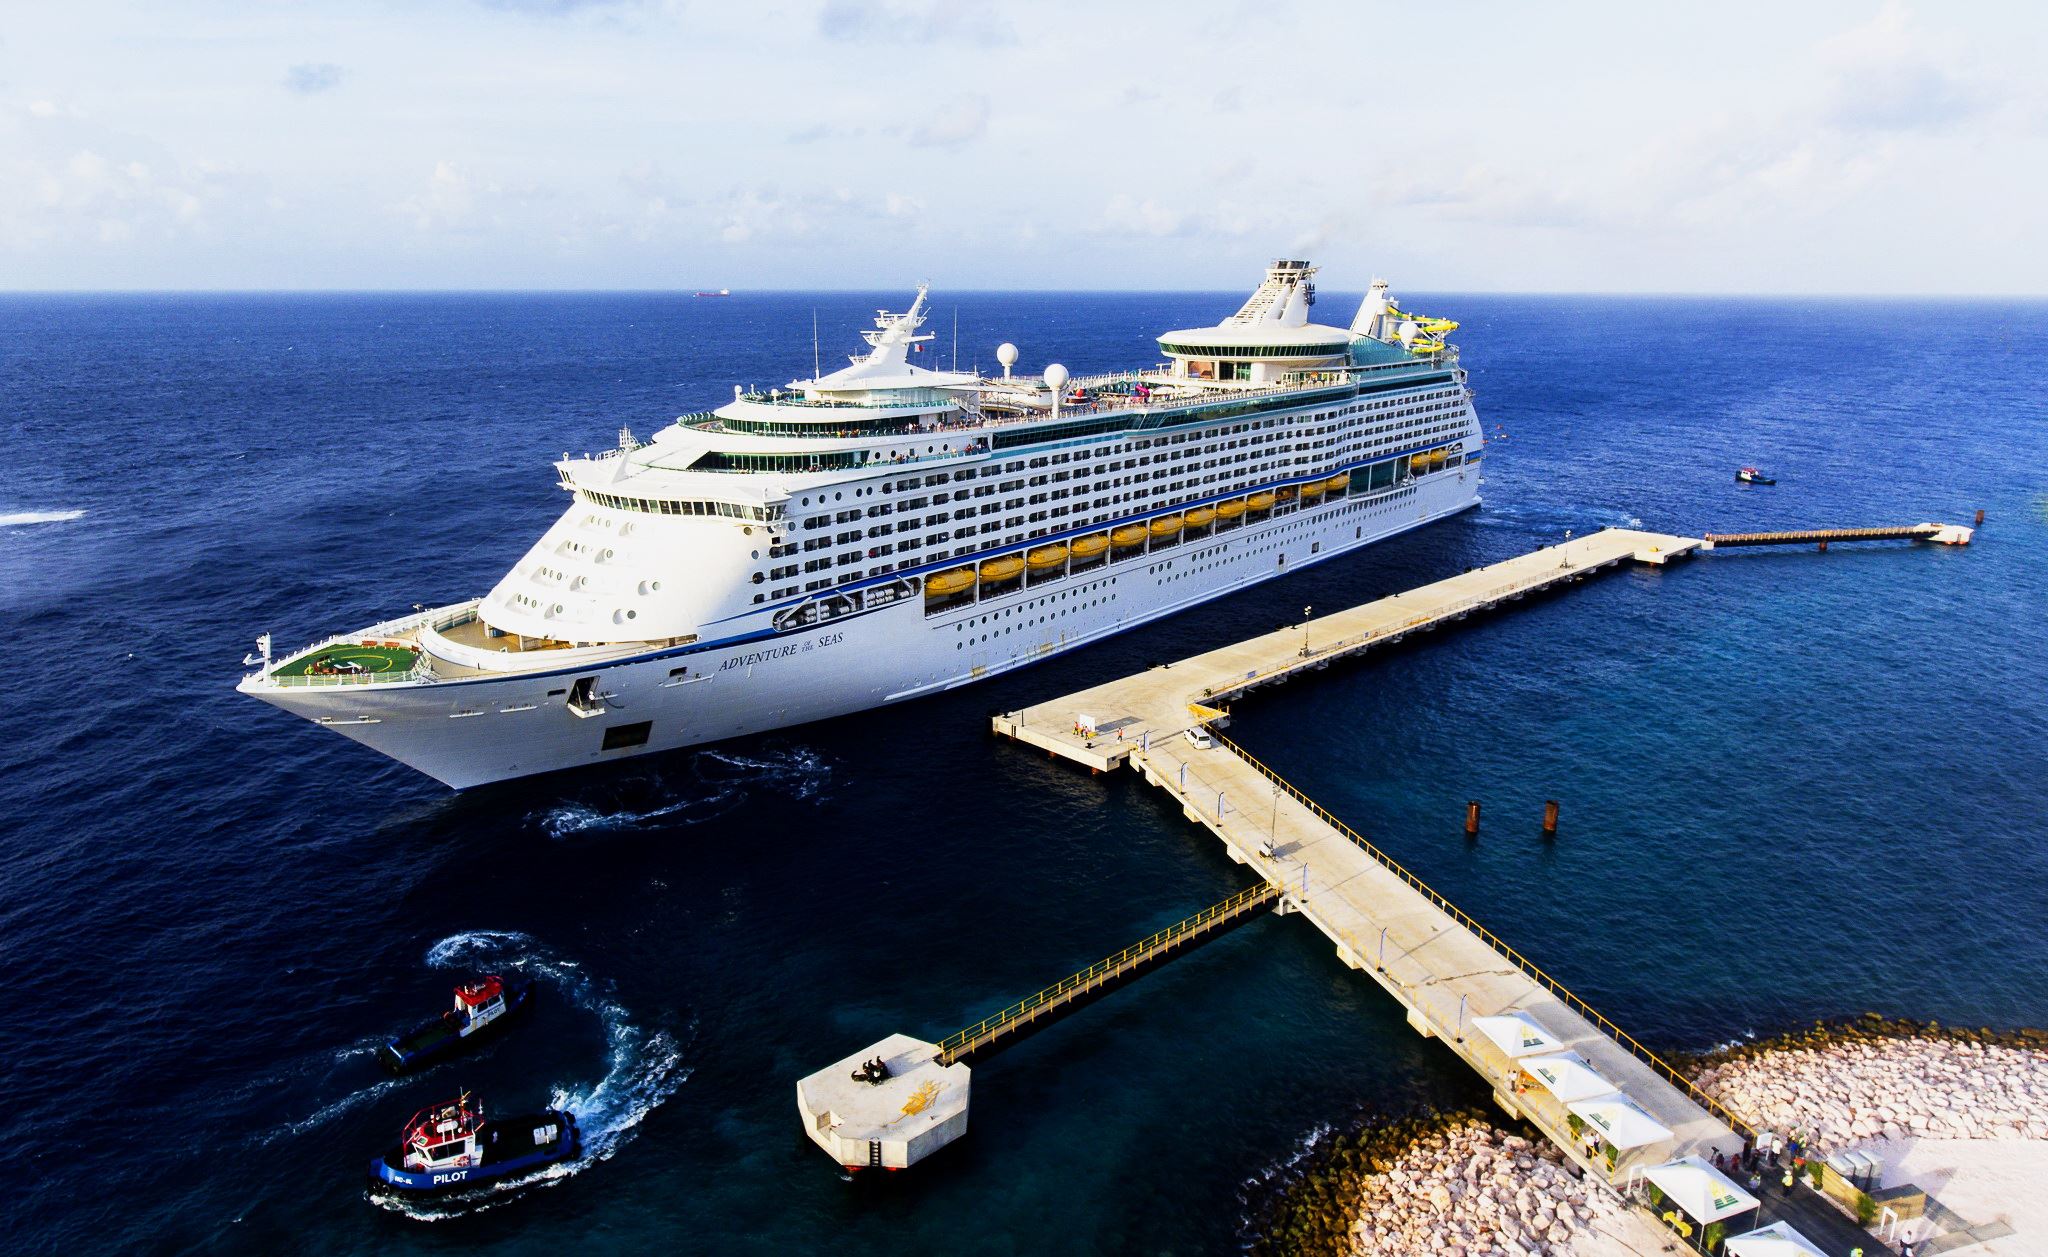 Great day for Curaçao First cruise ship to dock at second mega pier